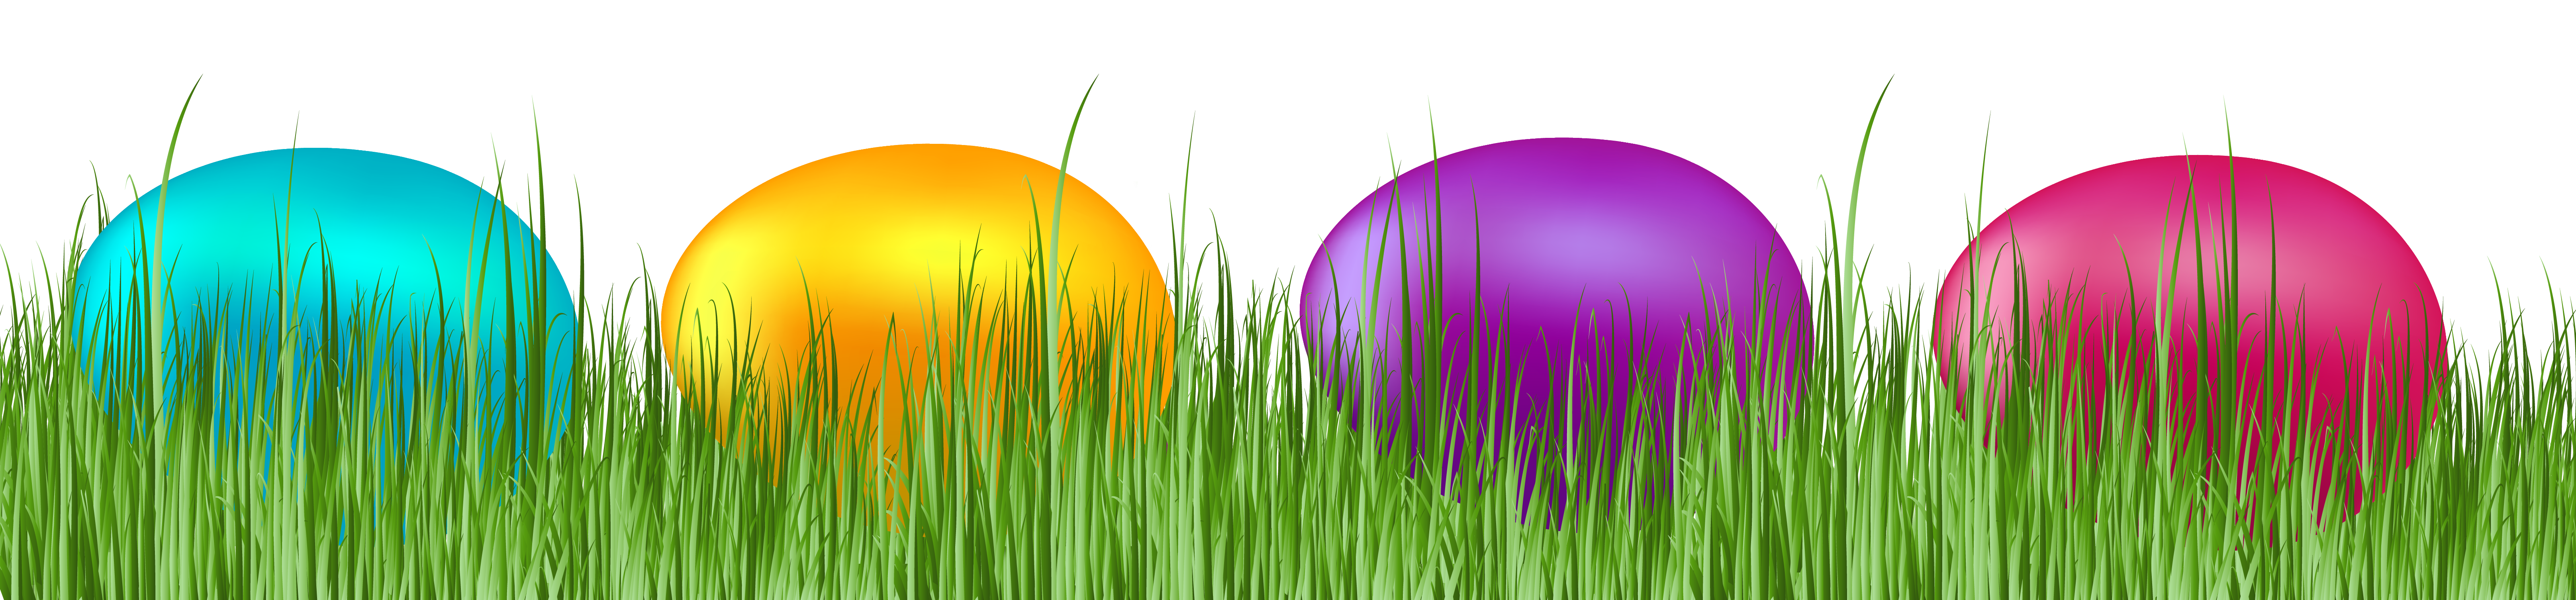 Free Easter Grass Cliparts, Download Free Clip Art, Free